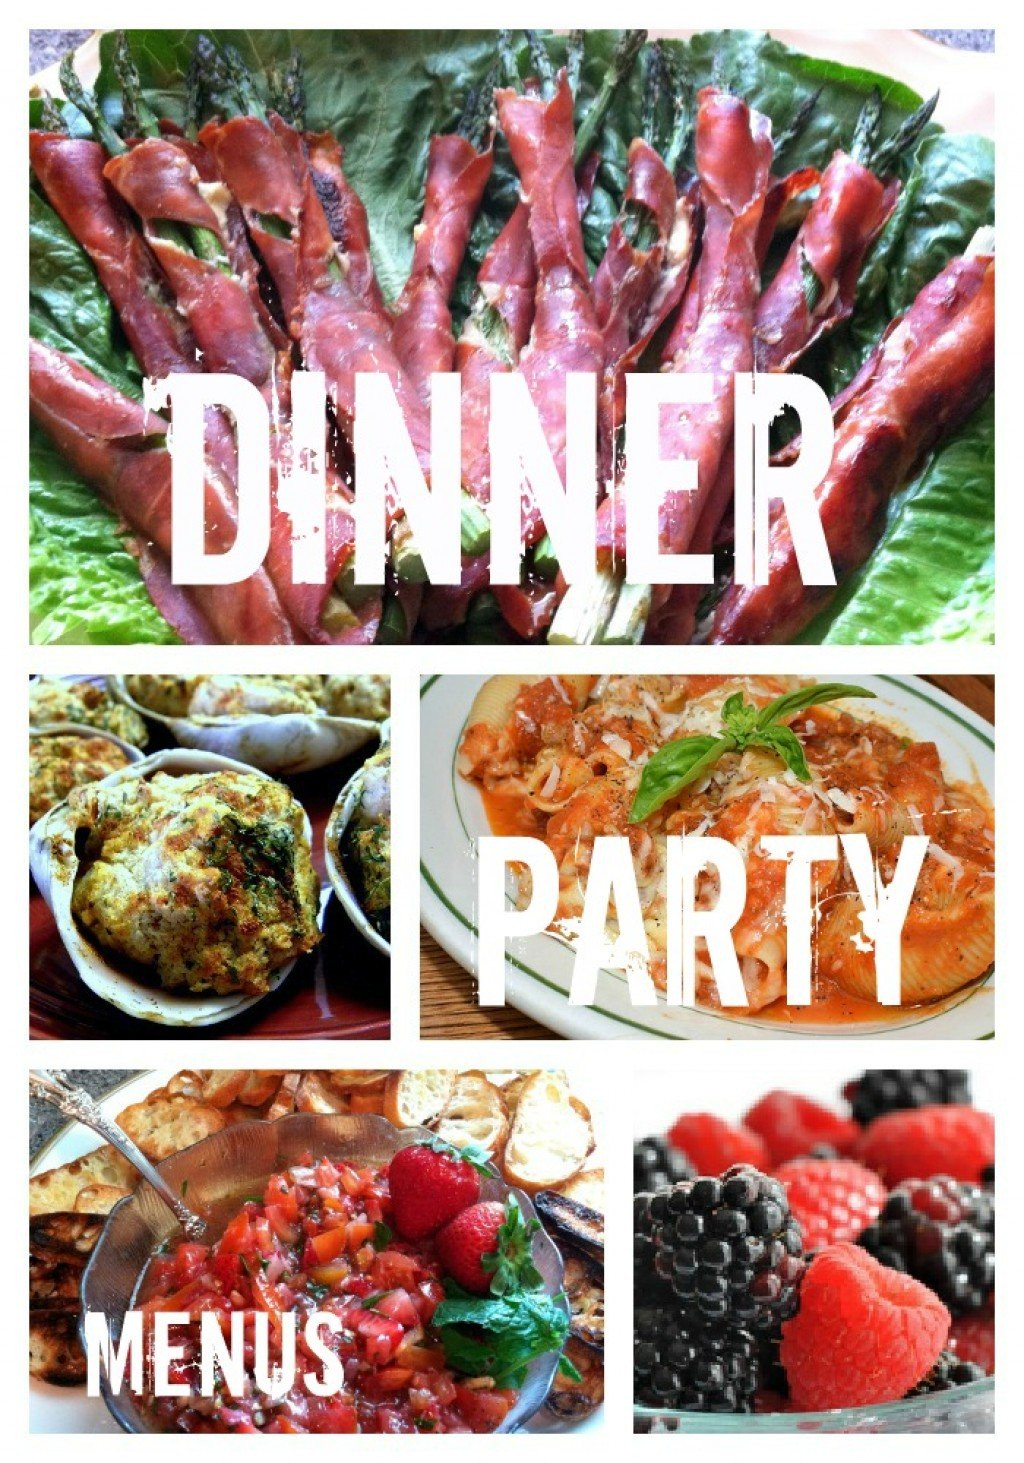 Large Dinner Party Food Ideas
 Dinner Party Recipes